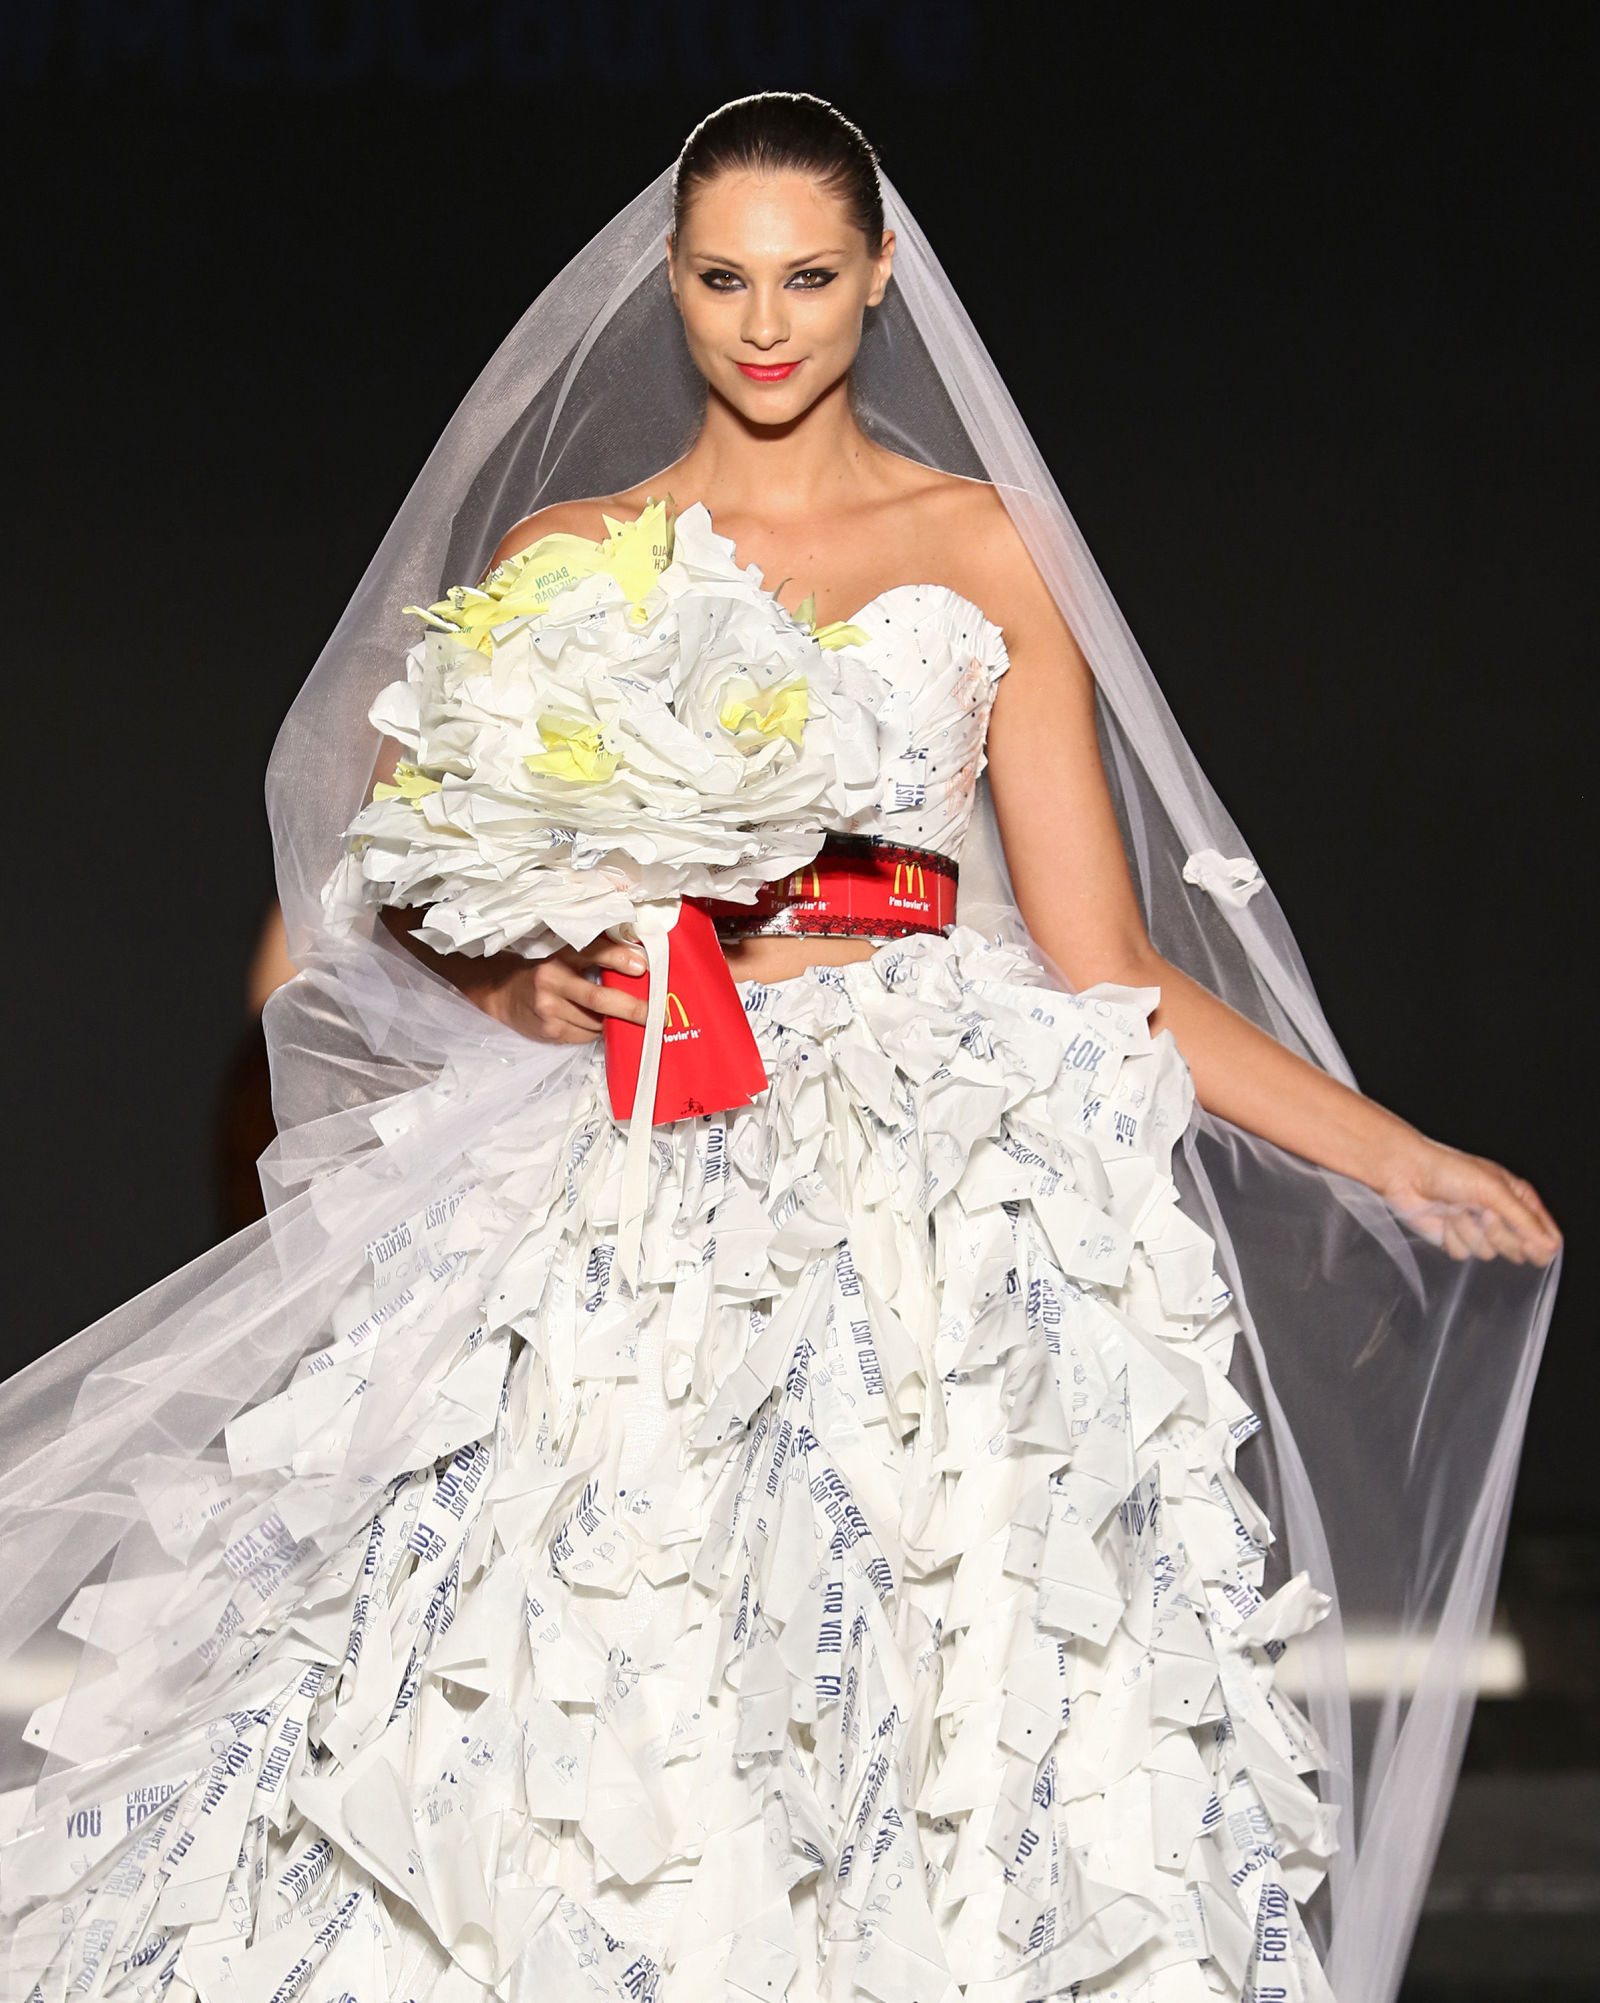 A wedding dress made from McDonald's wrappers! Image: Getty/Alexander Tamargo